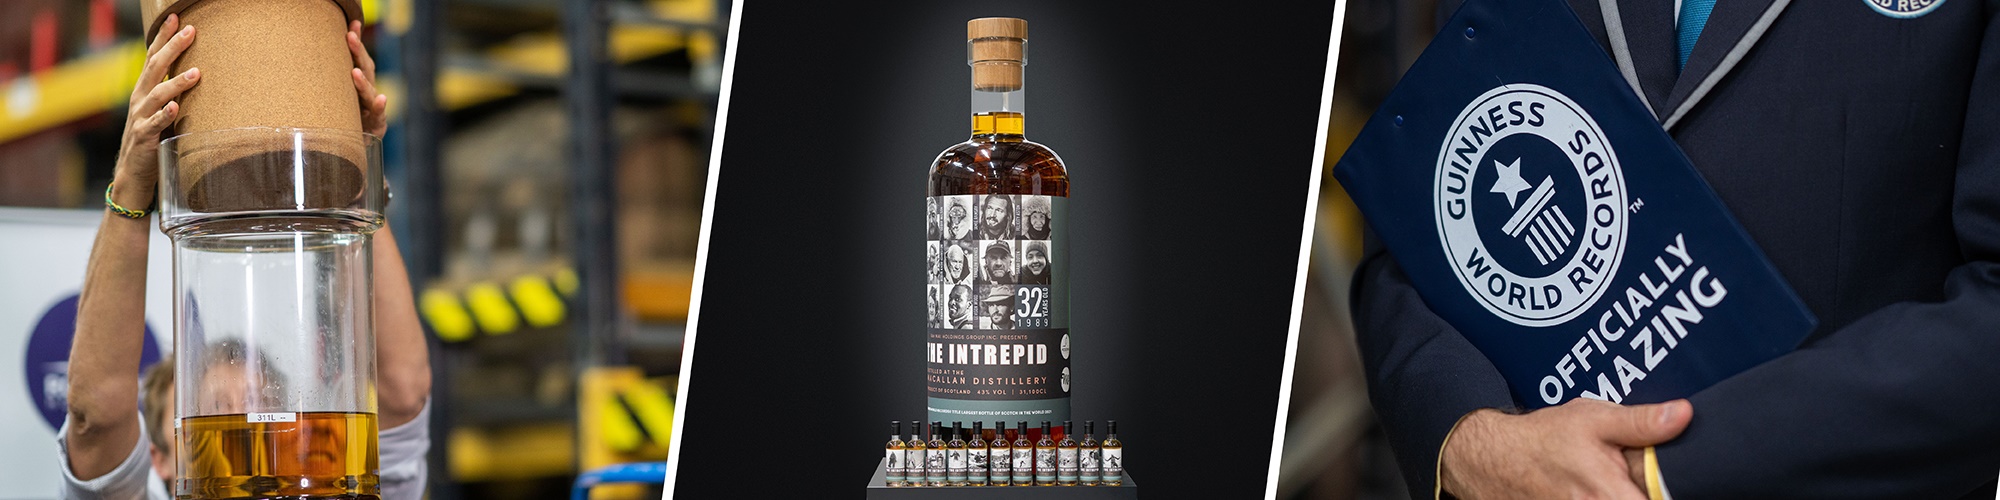 THE INTREPID World Record Whisky 